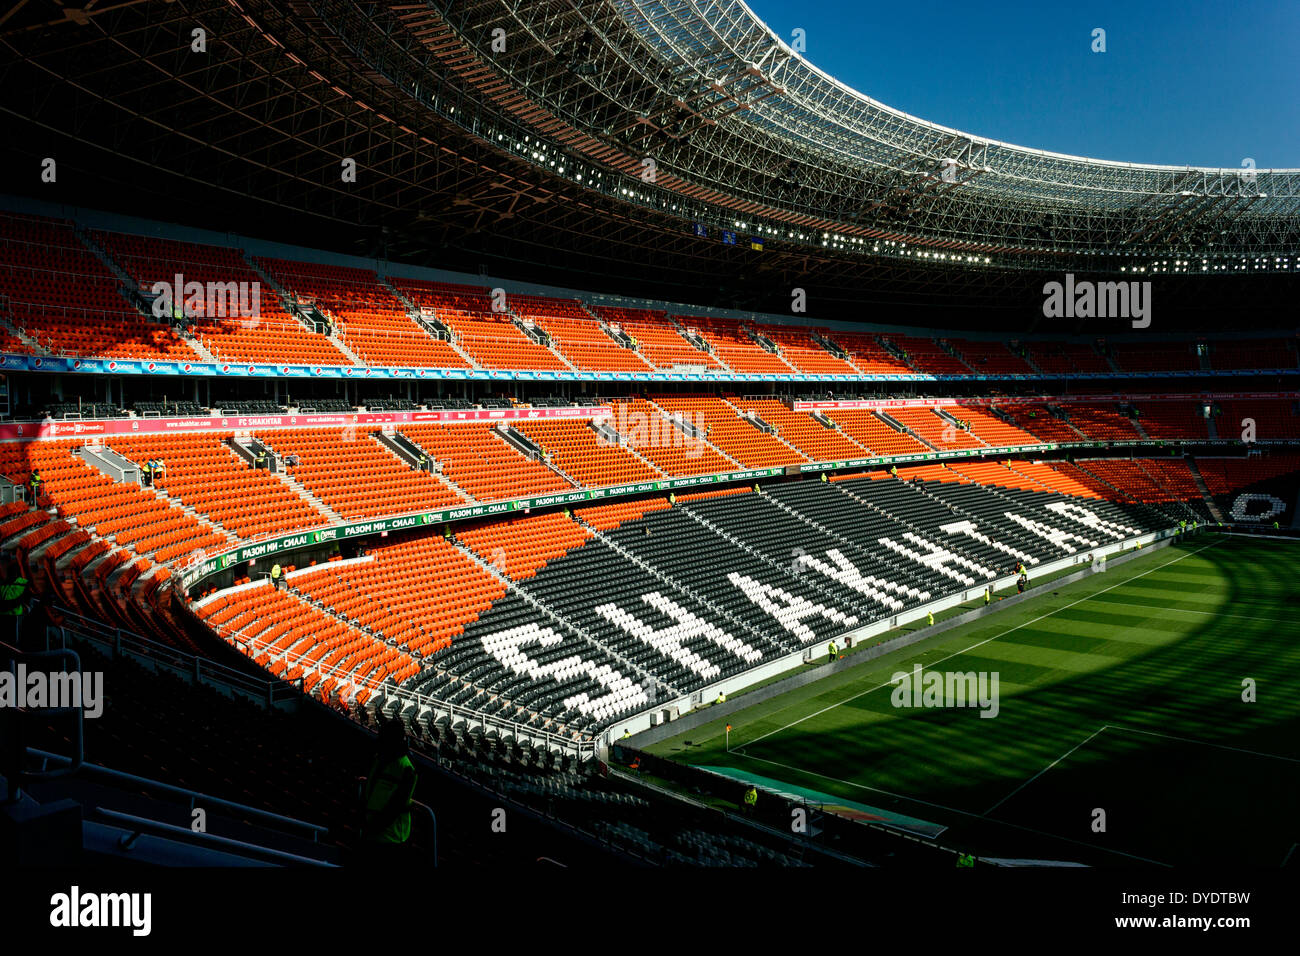 Donetsk, Ukraine, april 5 2014 Donbass arena stadium before football game between FC Shakhtar and FC Karpaty. Stock Photo